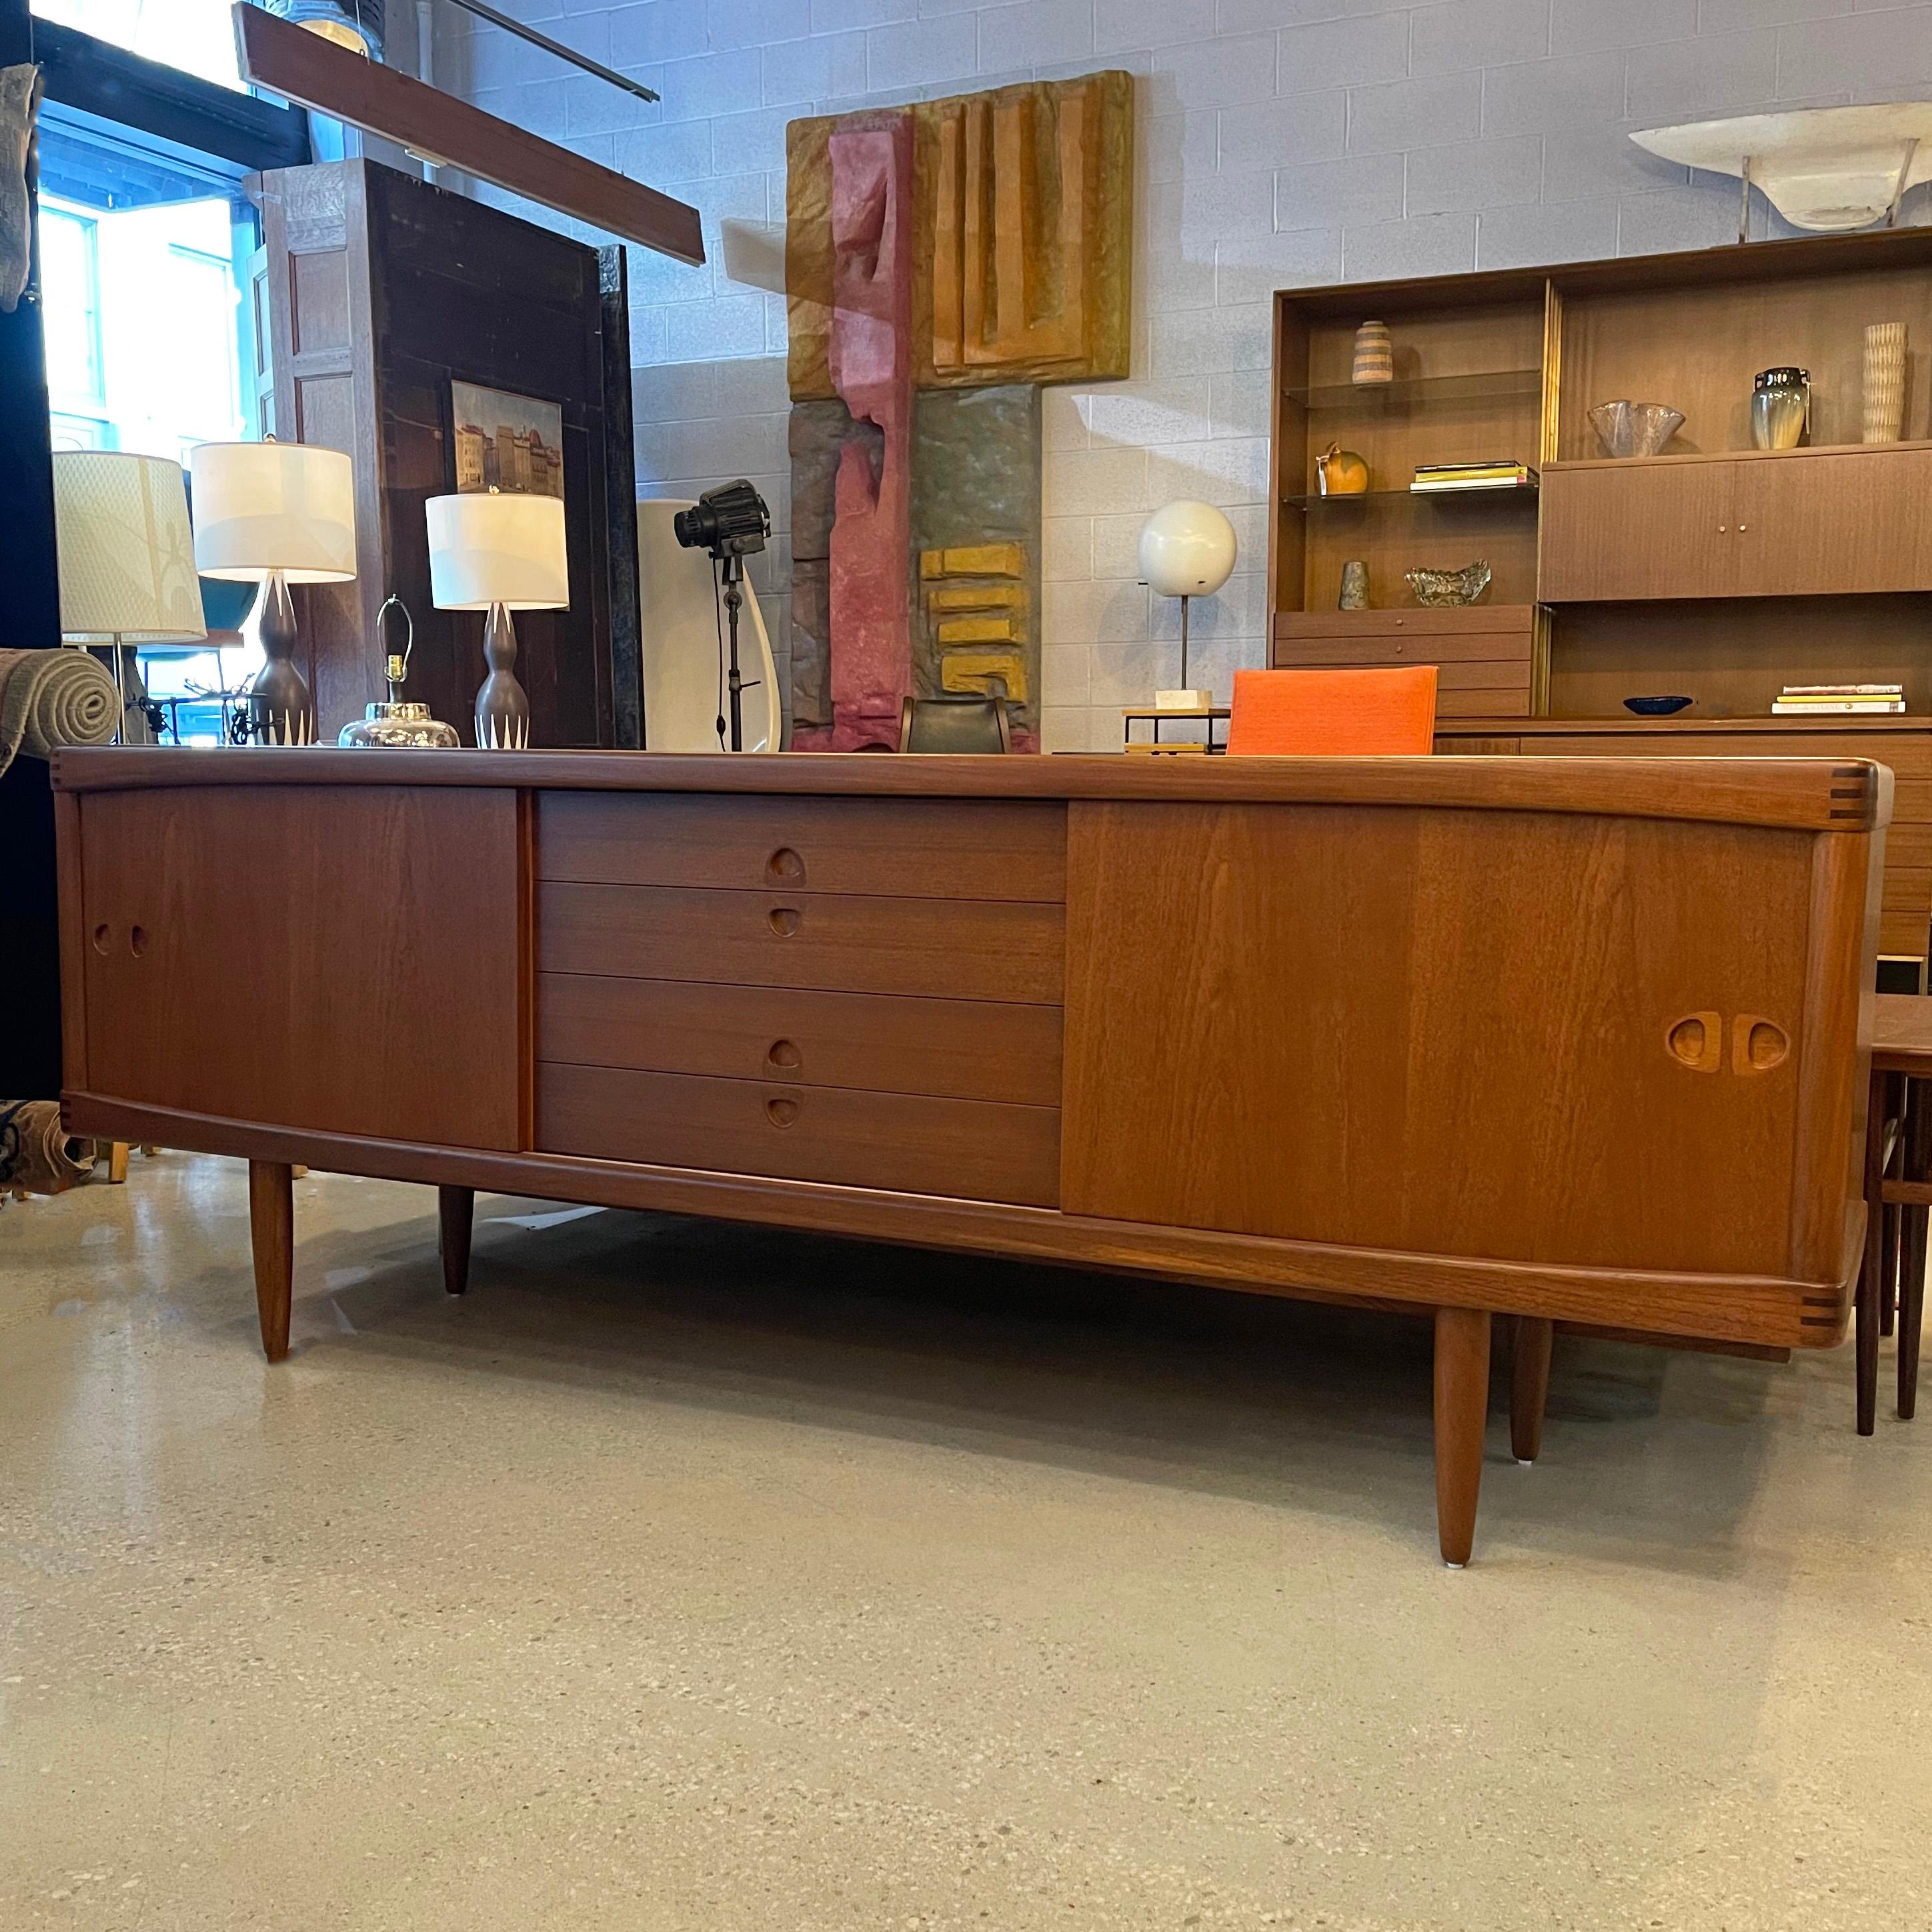 Danish modern, teak, credenza / sideboard by H.W. Klein for Bramin Mobler features sliding doors on either side with exposed drawers in the middle with recessed guitar pick pulls. A TV frame with rosewood inlay at each corner encases the front and